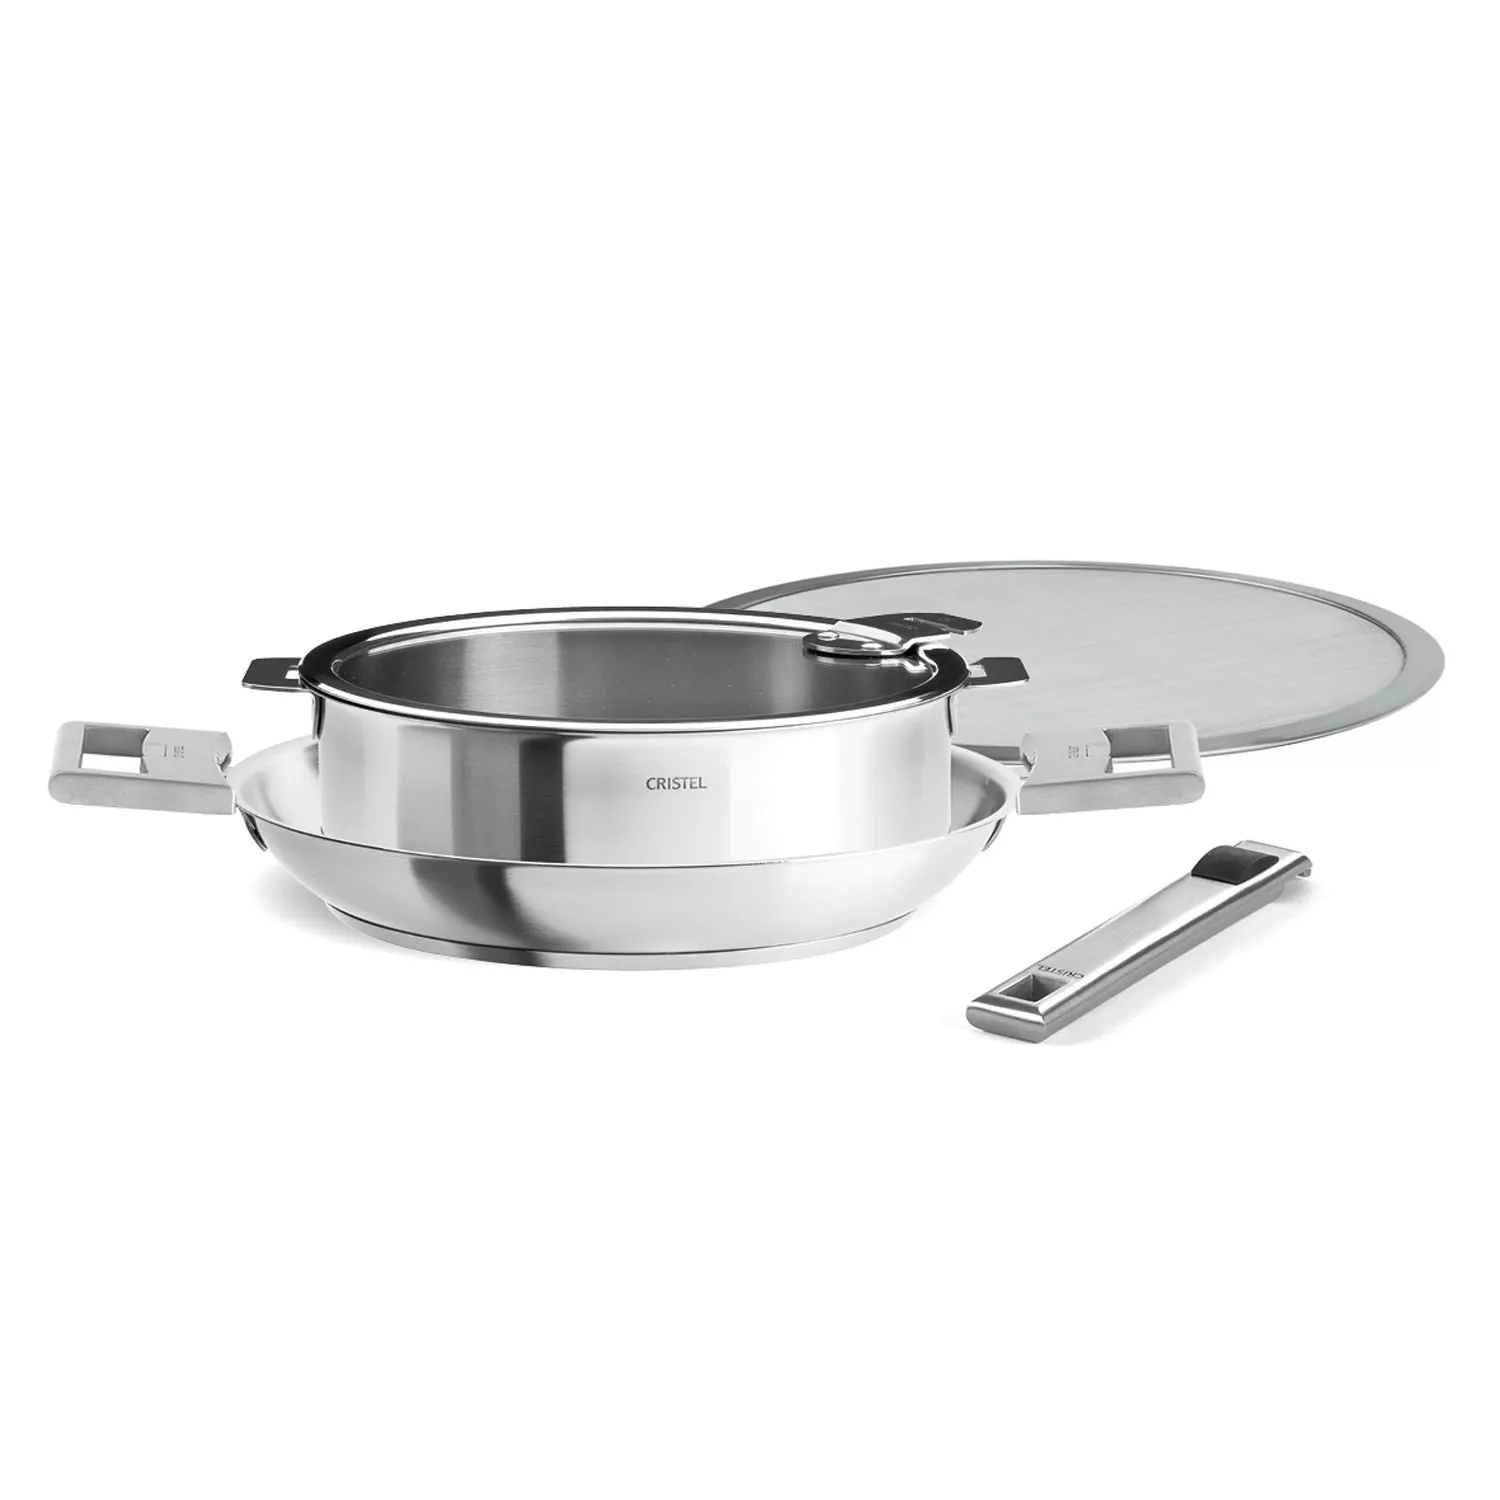  Gourmet Edge - 7pc Stainless Steel Cookware Set with